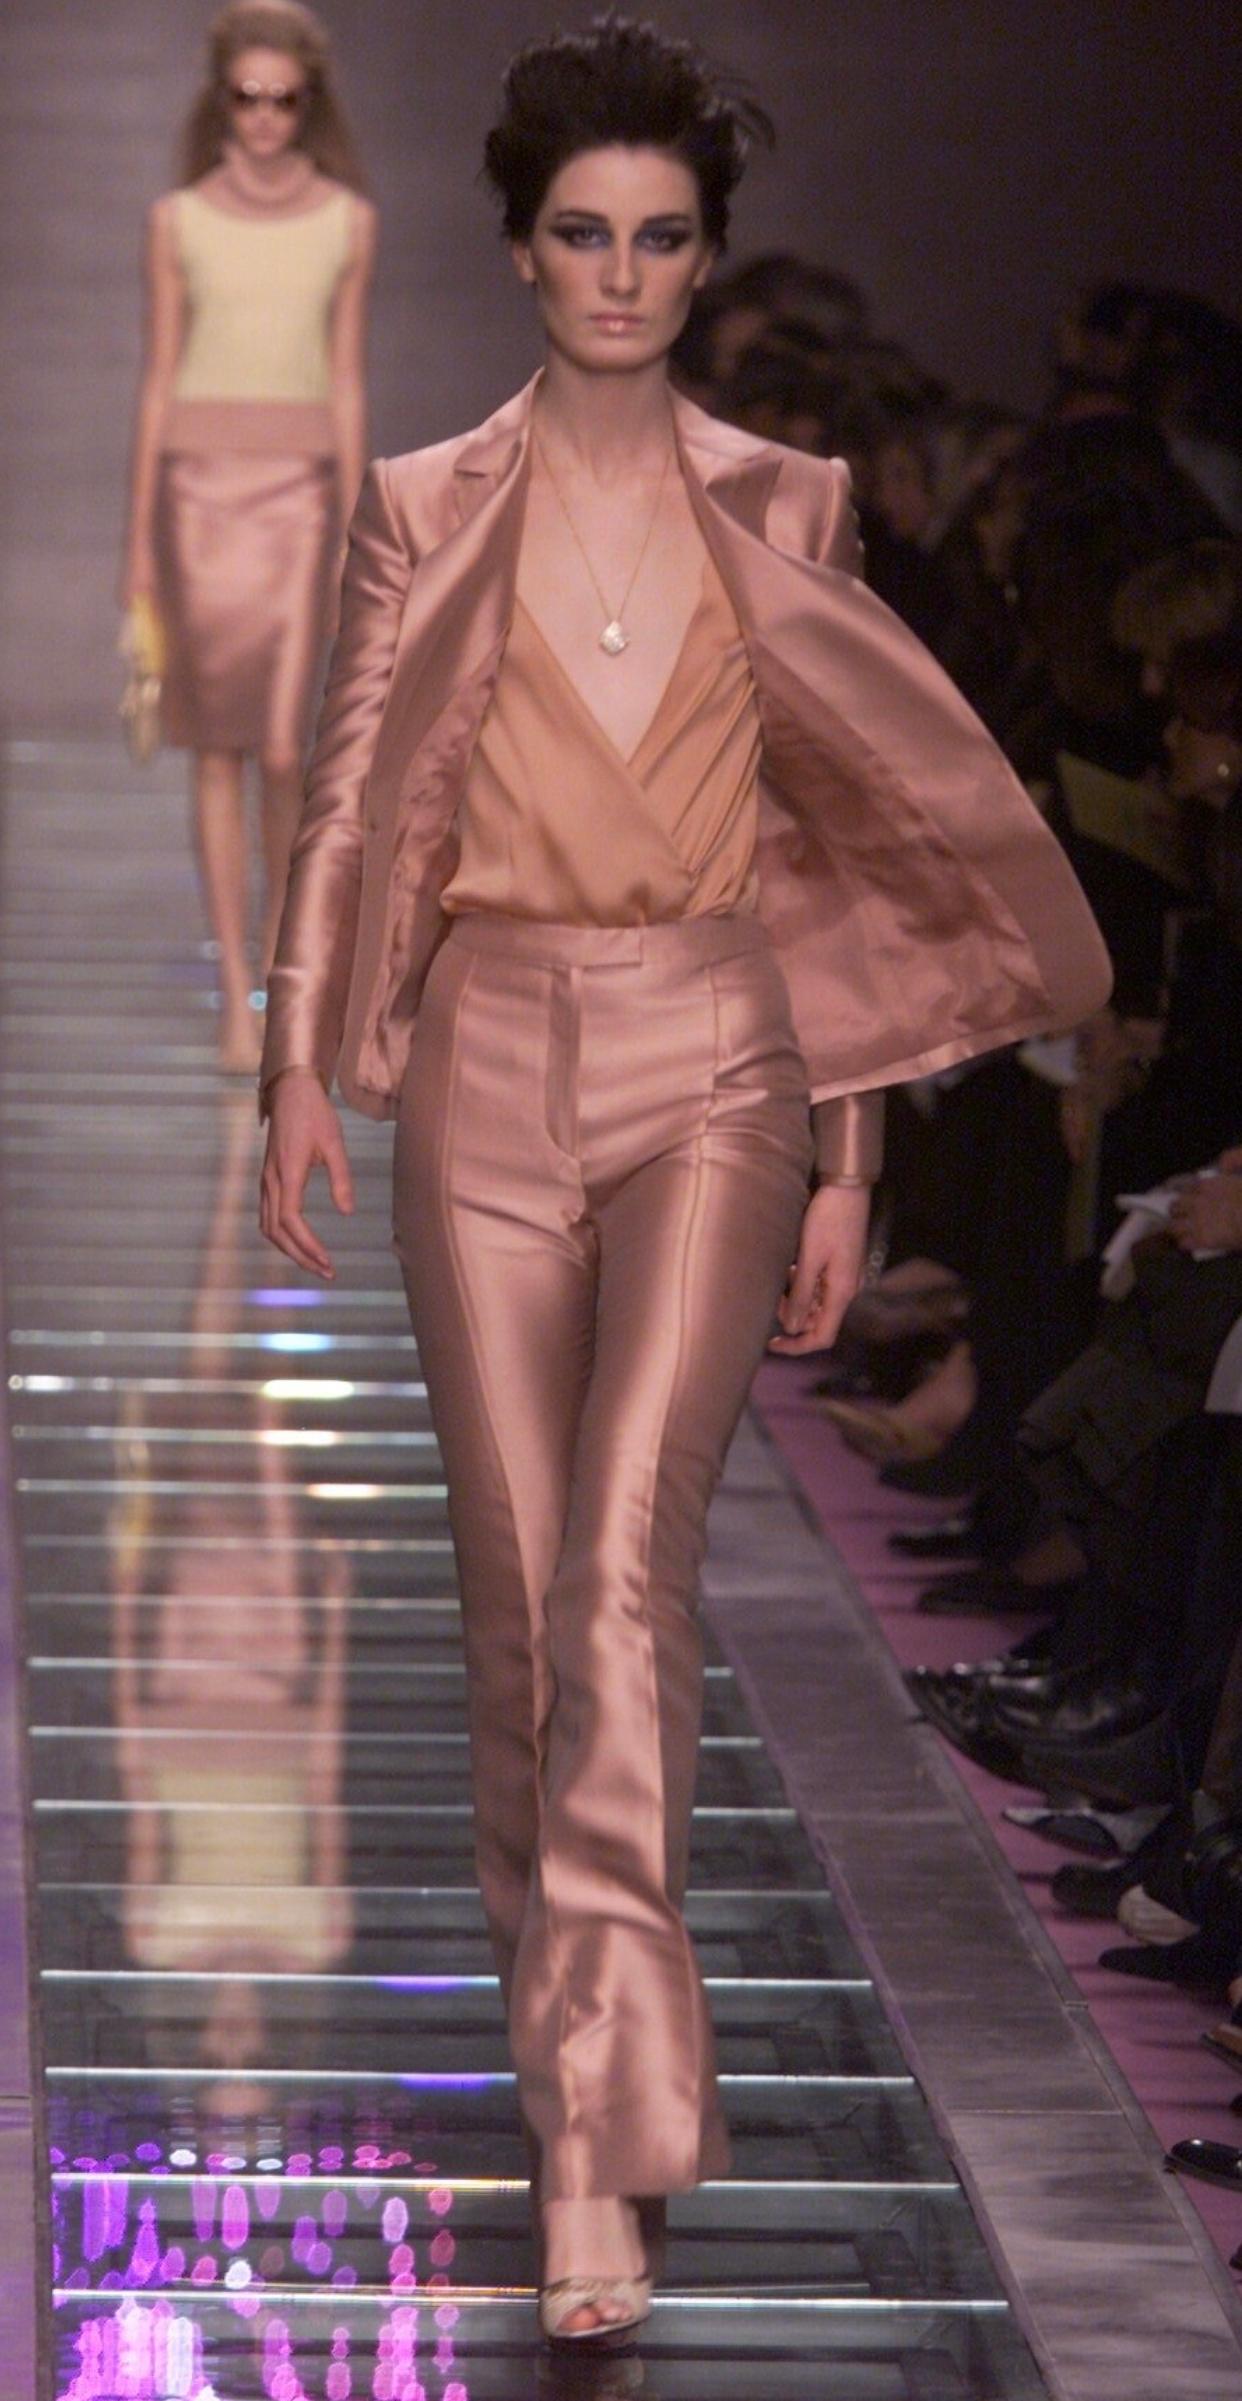 Introducing the Gianni Versace Silk Shimmer Gold Pink Suit from the Fall/Winter 2000 runway. This opulent ensemble features Medusa buttons and a flawless tailored fit, exuding timeless elegance and luxury. Embrace Versace's fearless style and make a